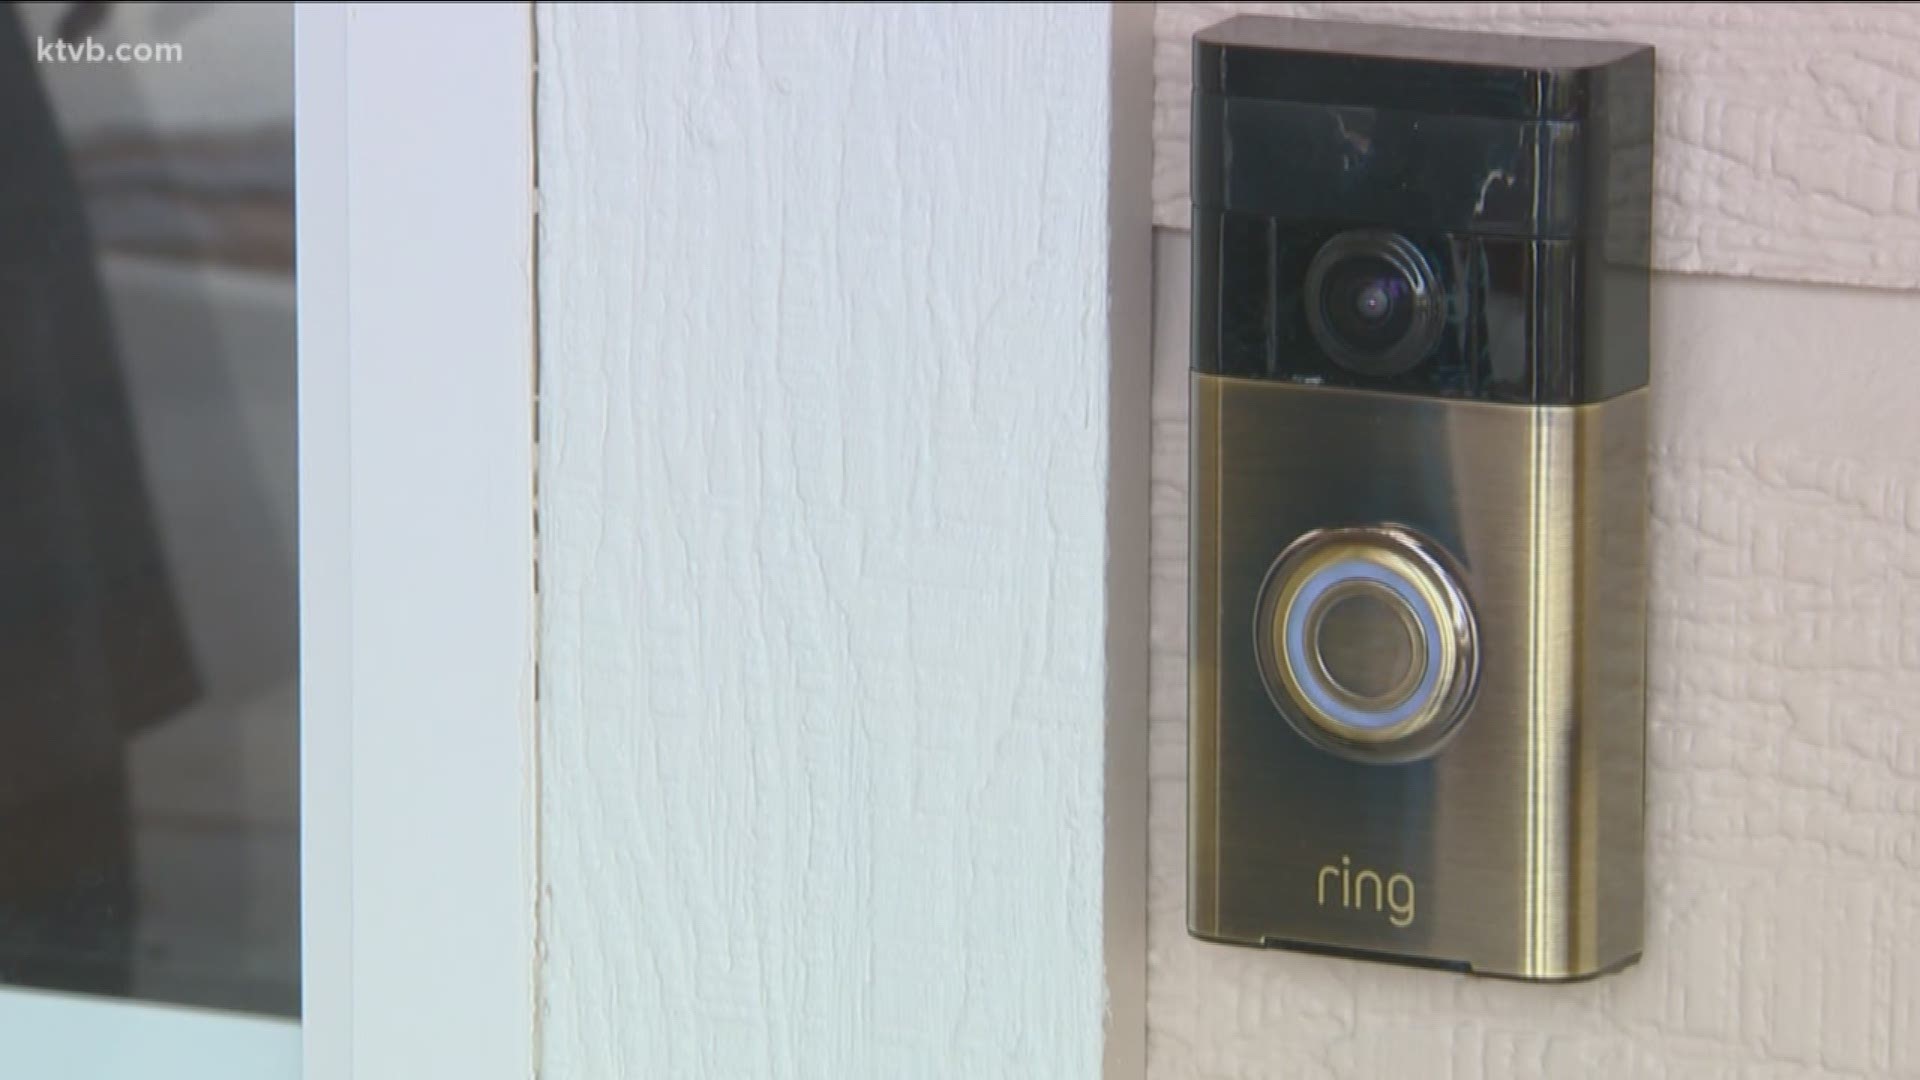 The smart doorbells feature a video system that sometimes captures a criminal in the act.